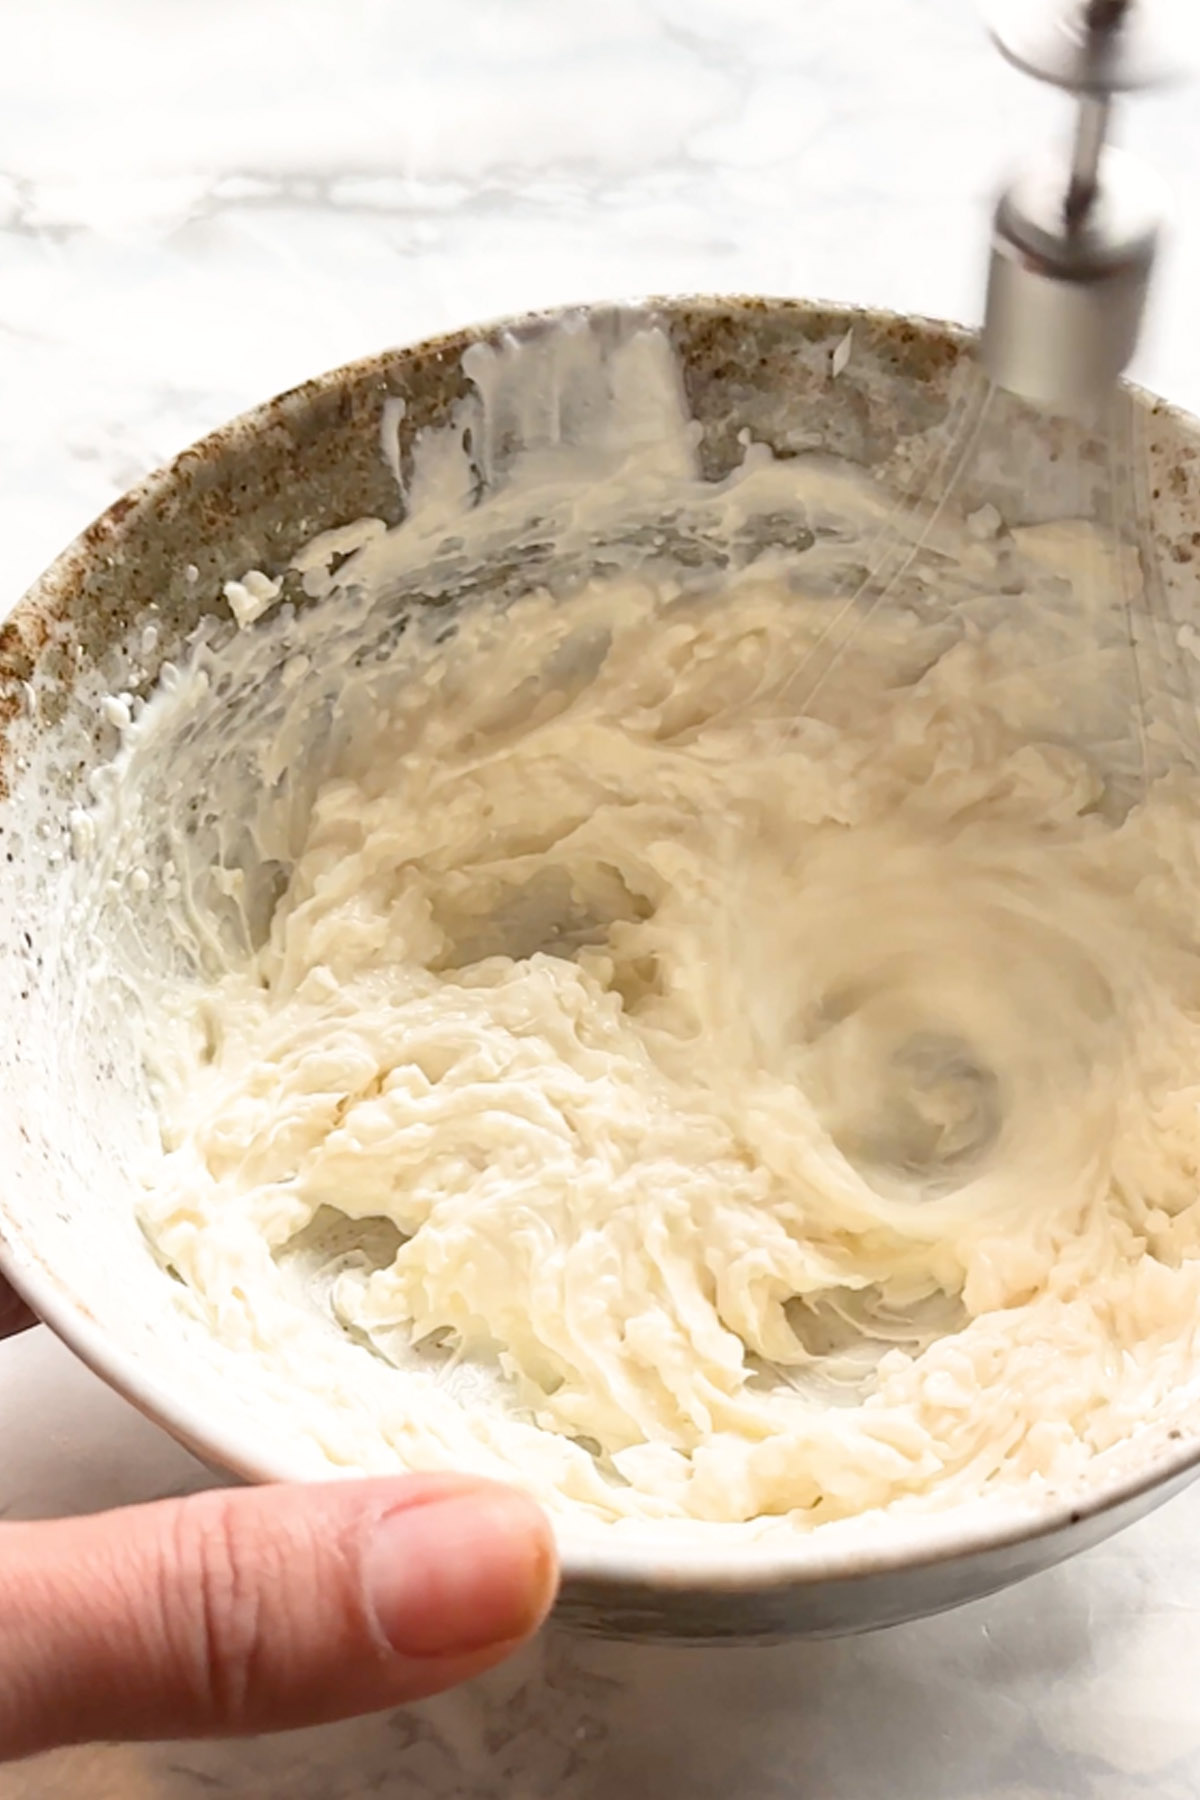 Cream cheese is whipped in bowl.